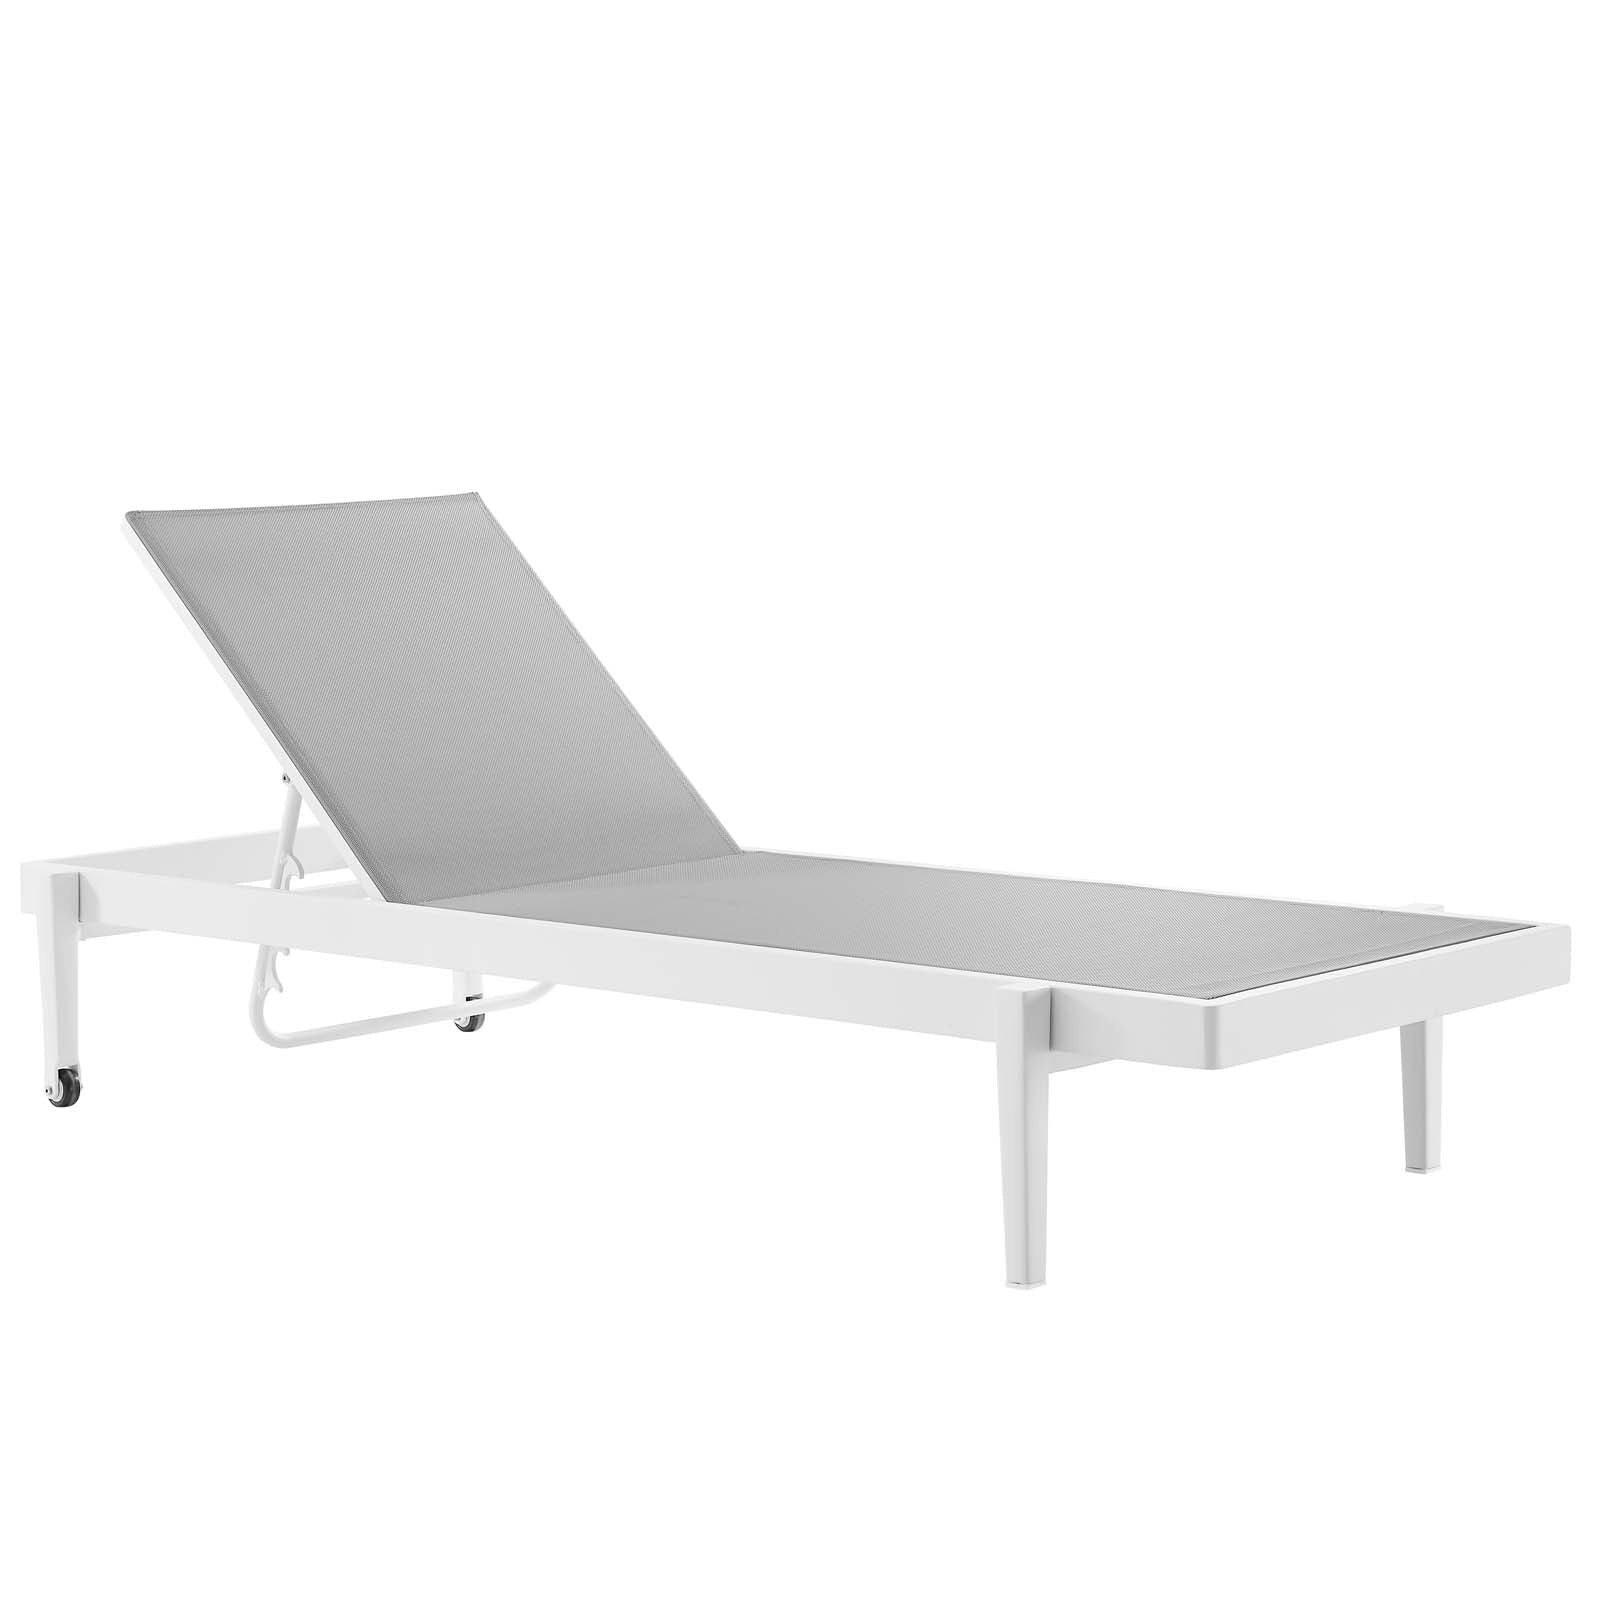 Modway Outdoor Loungers - Charleston Outdoor Patio Aluminum Chaise Lounge Chair Set of 2 White Gray